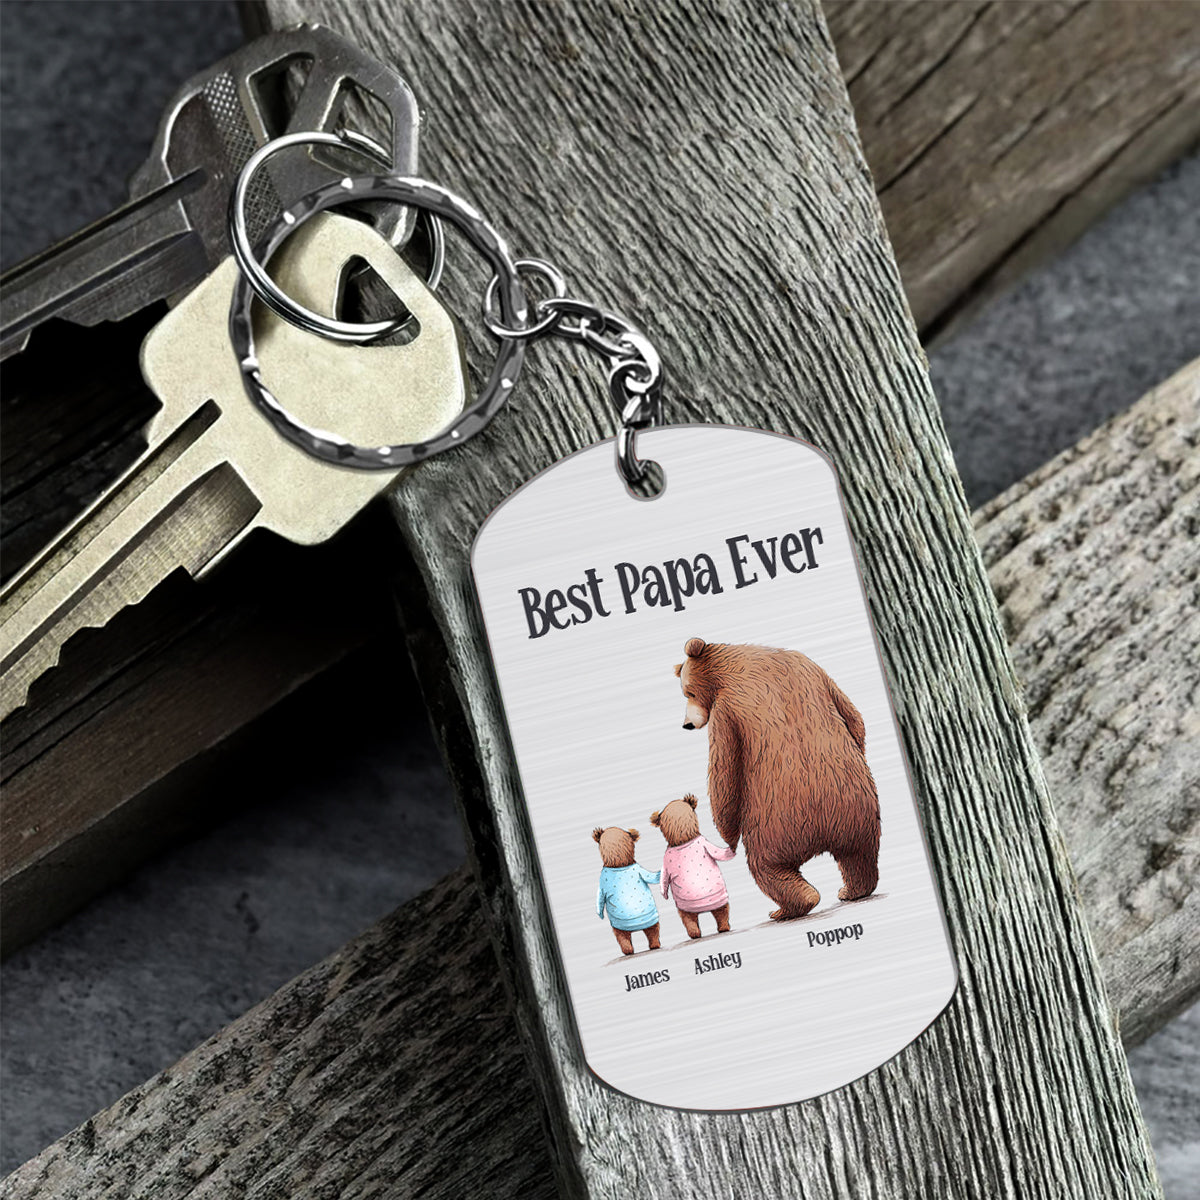 Papa Bear - Personalized Father's Day Grandpa Stainless Steel Keychain